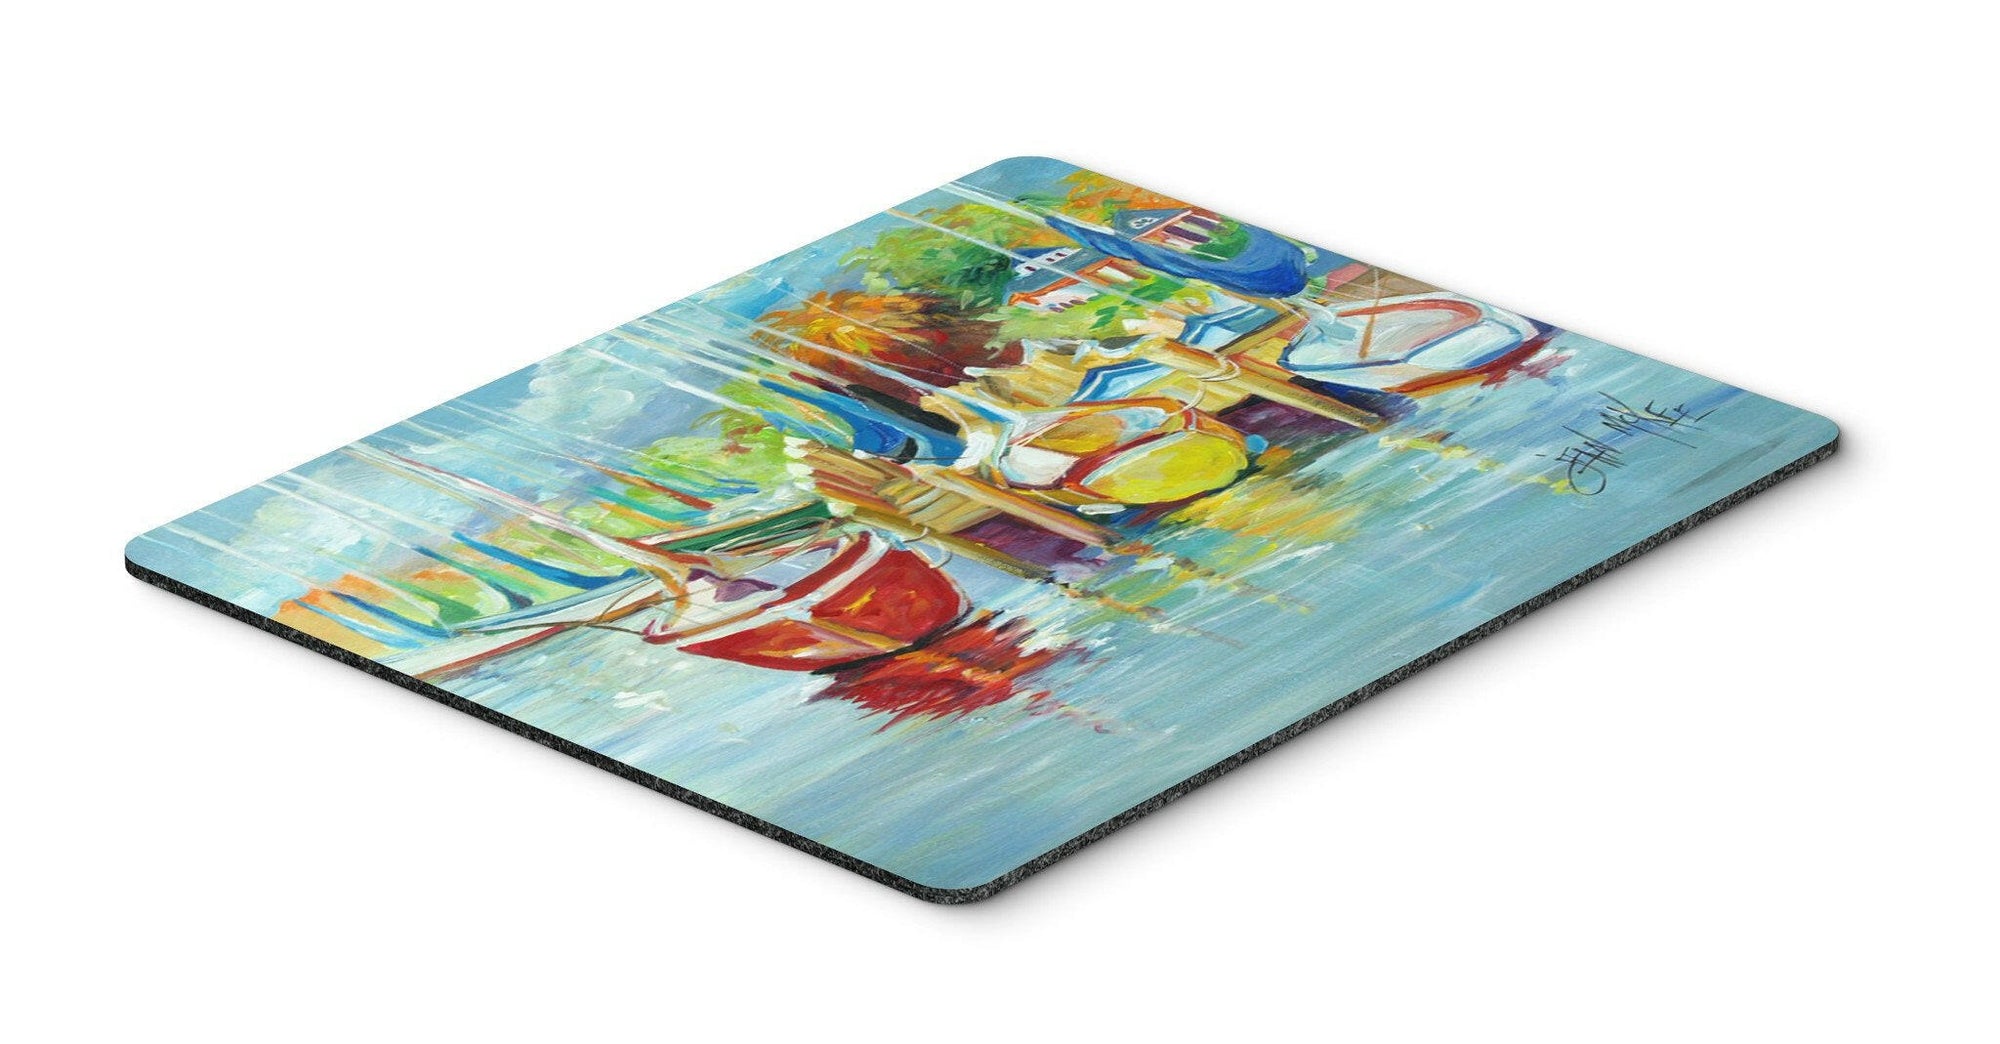 On the Dock Sailboats Mouse Pad, Hot Pad or Trivet JMK1070MP by Caroline's Treasures